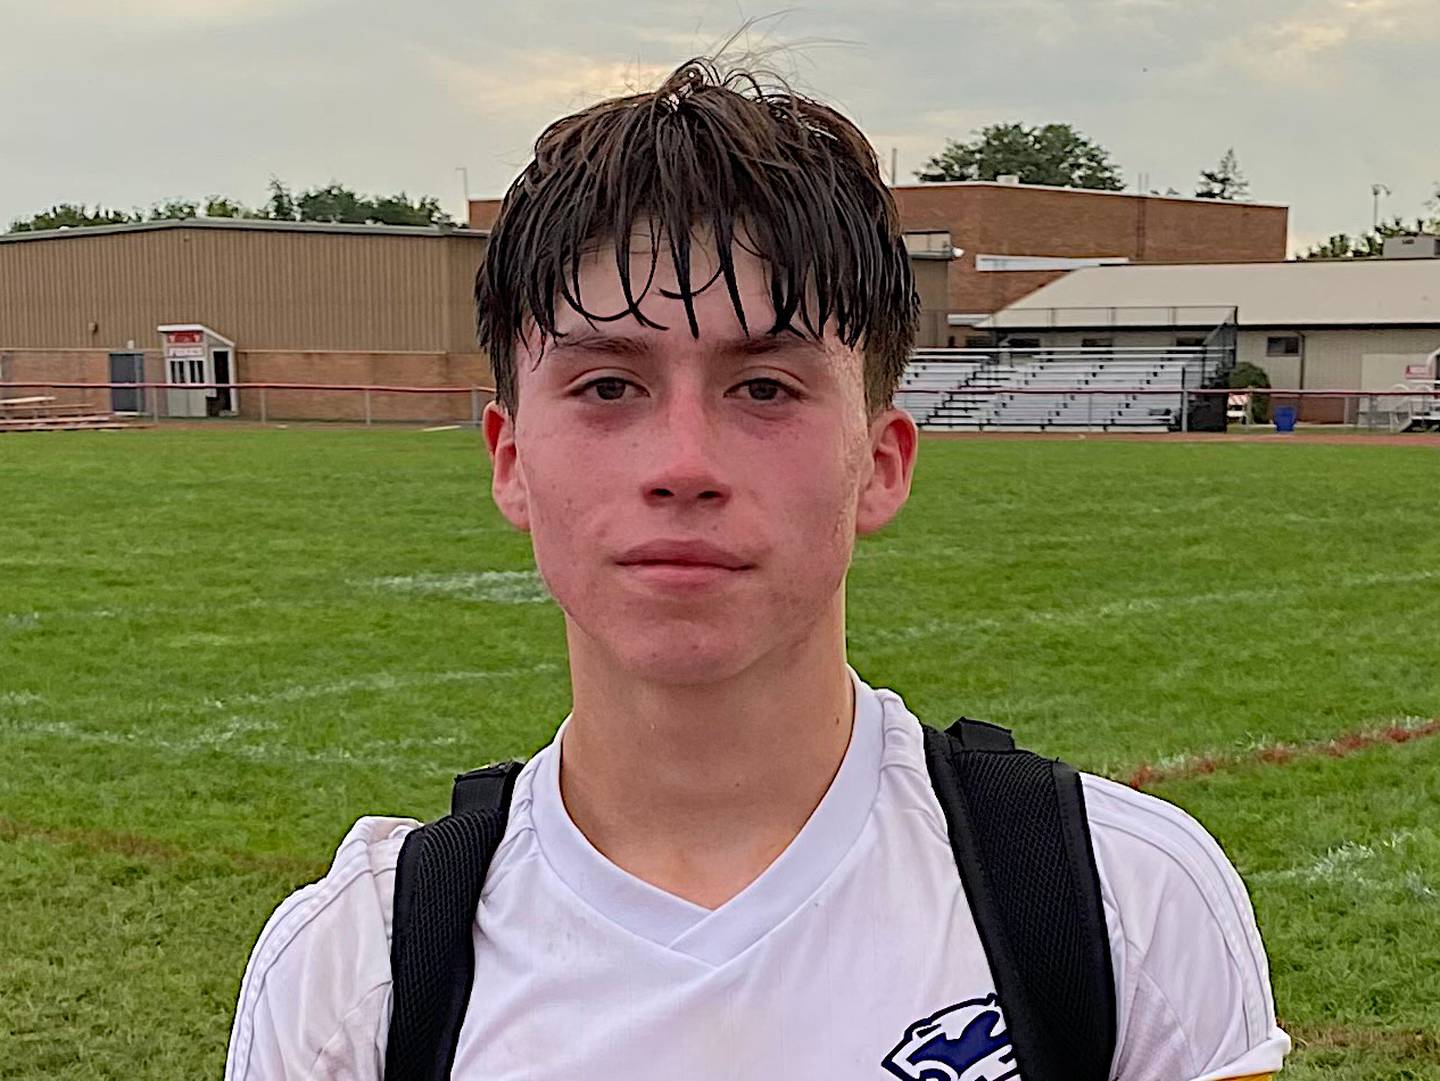 Ben Gamino scored all three of Plainfield South's goals in a 3-1 win over Yorkville on Monday.